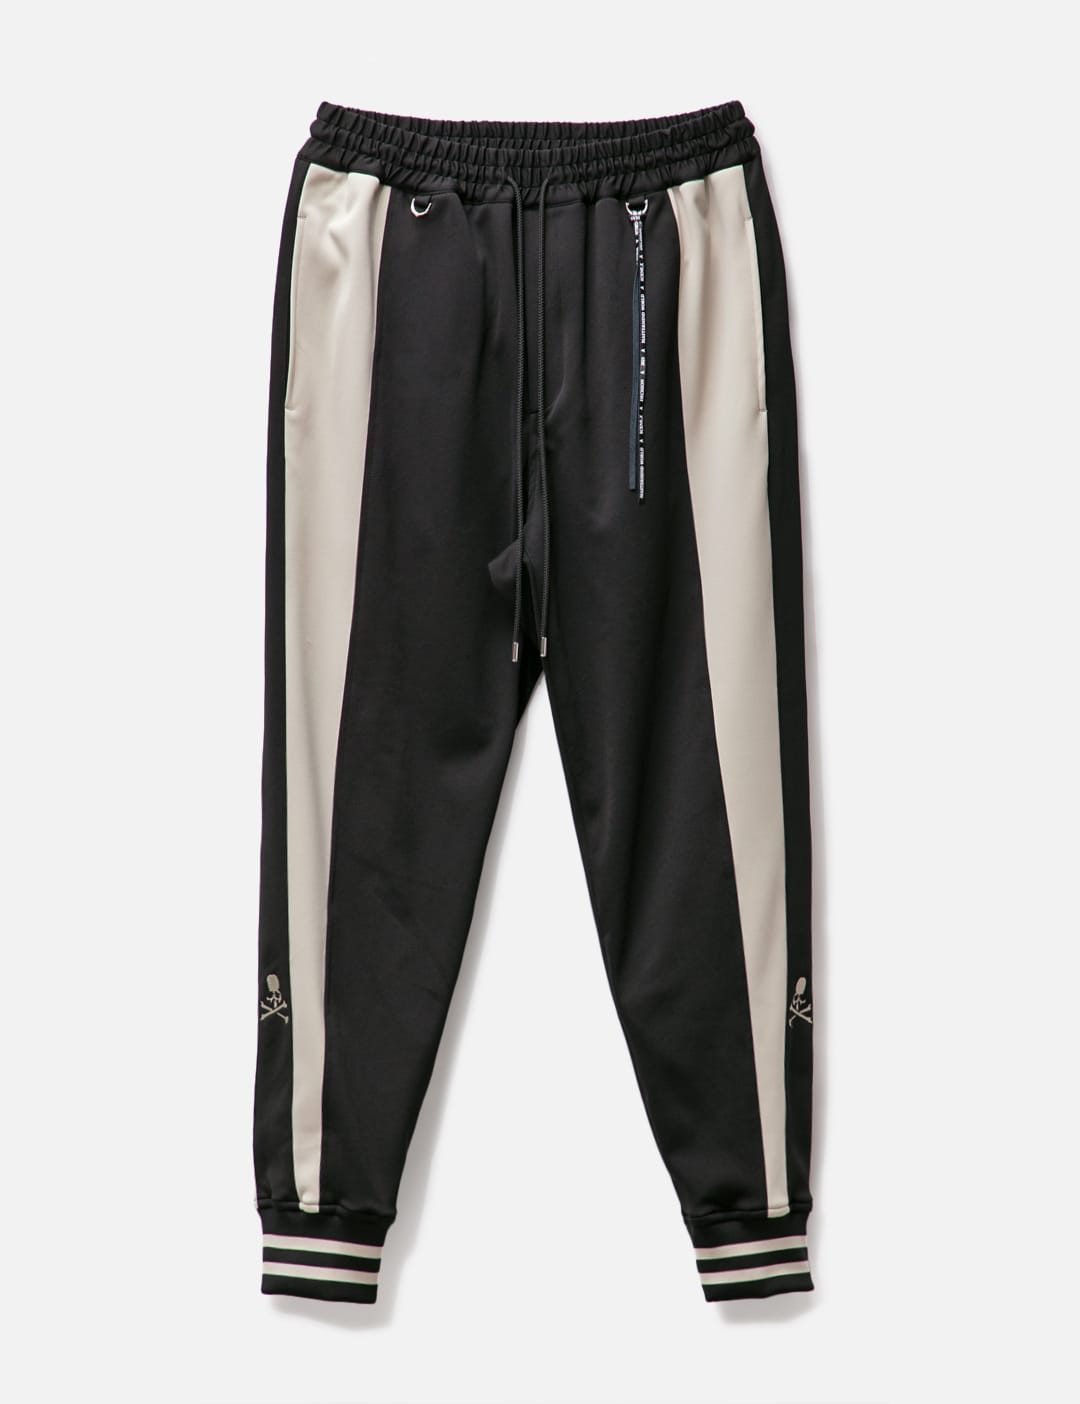 Male Polyester Buy Track Pants Online Best Prices in India